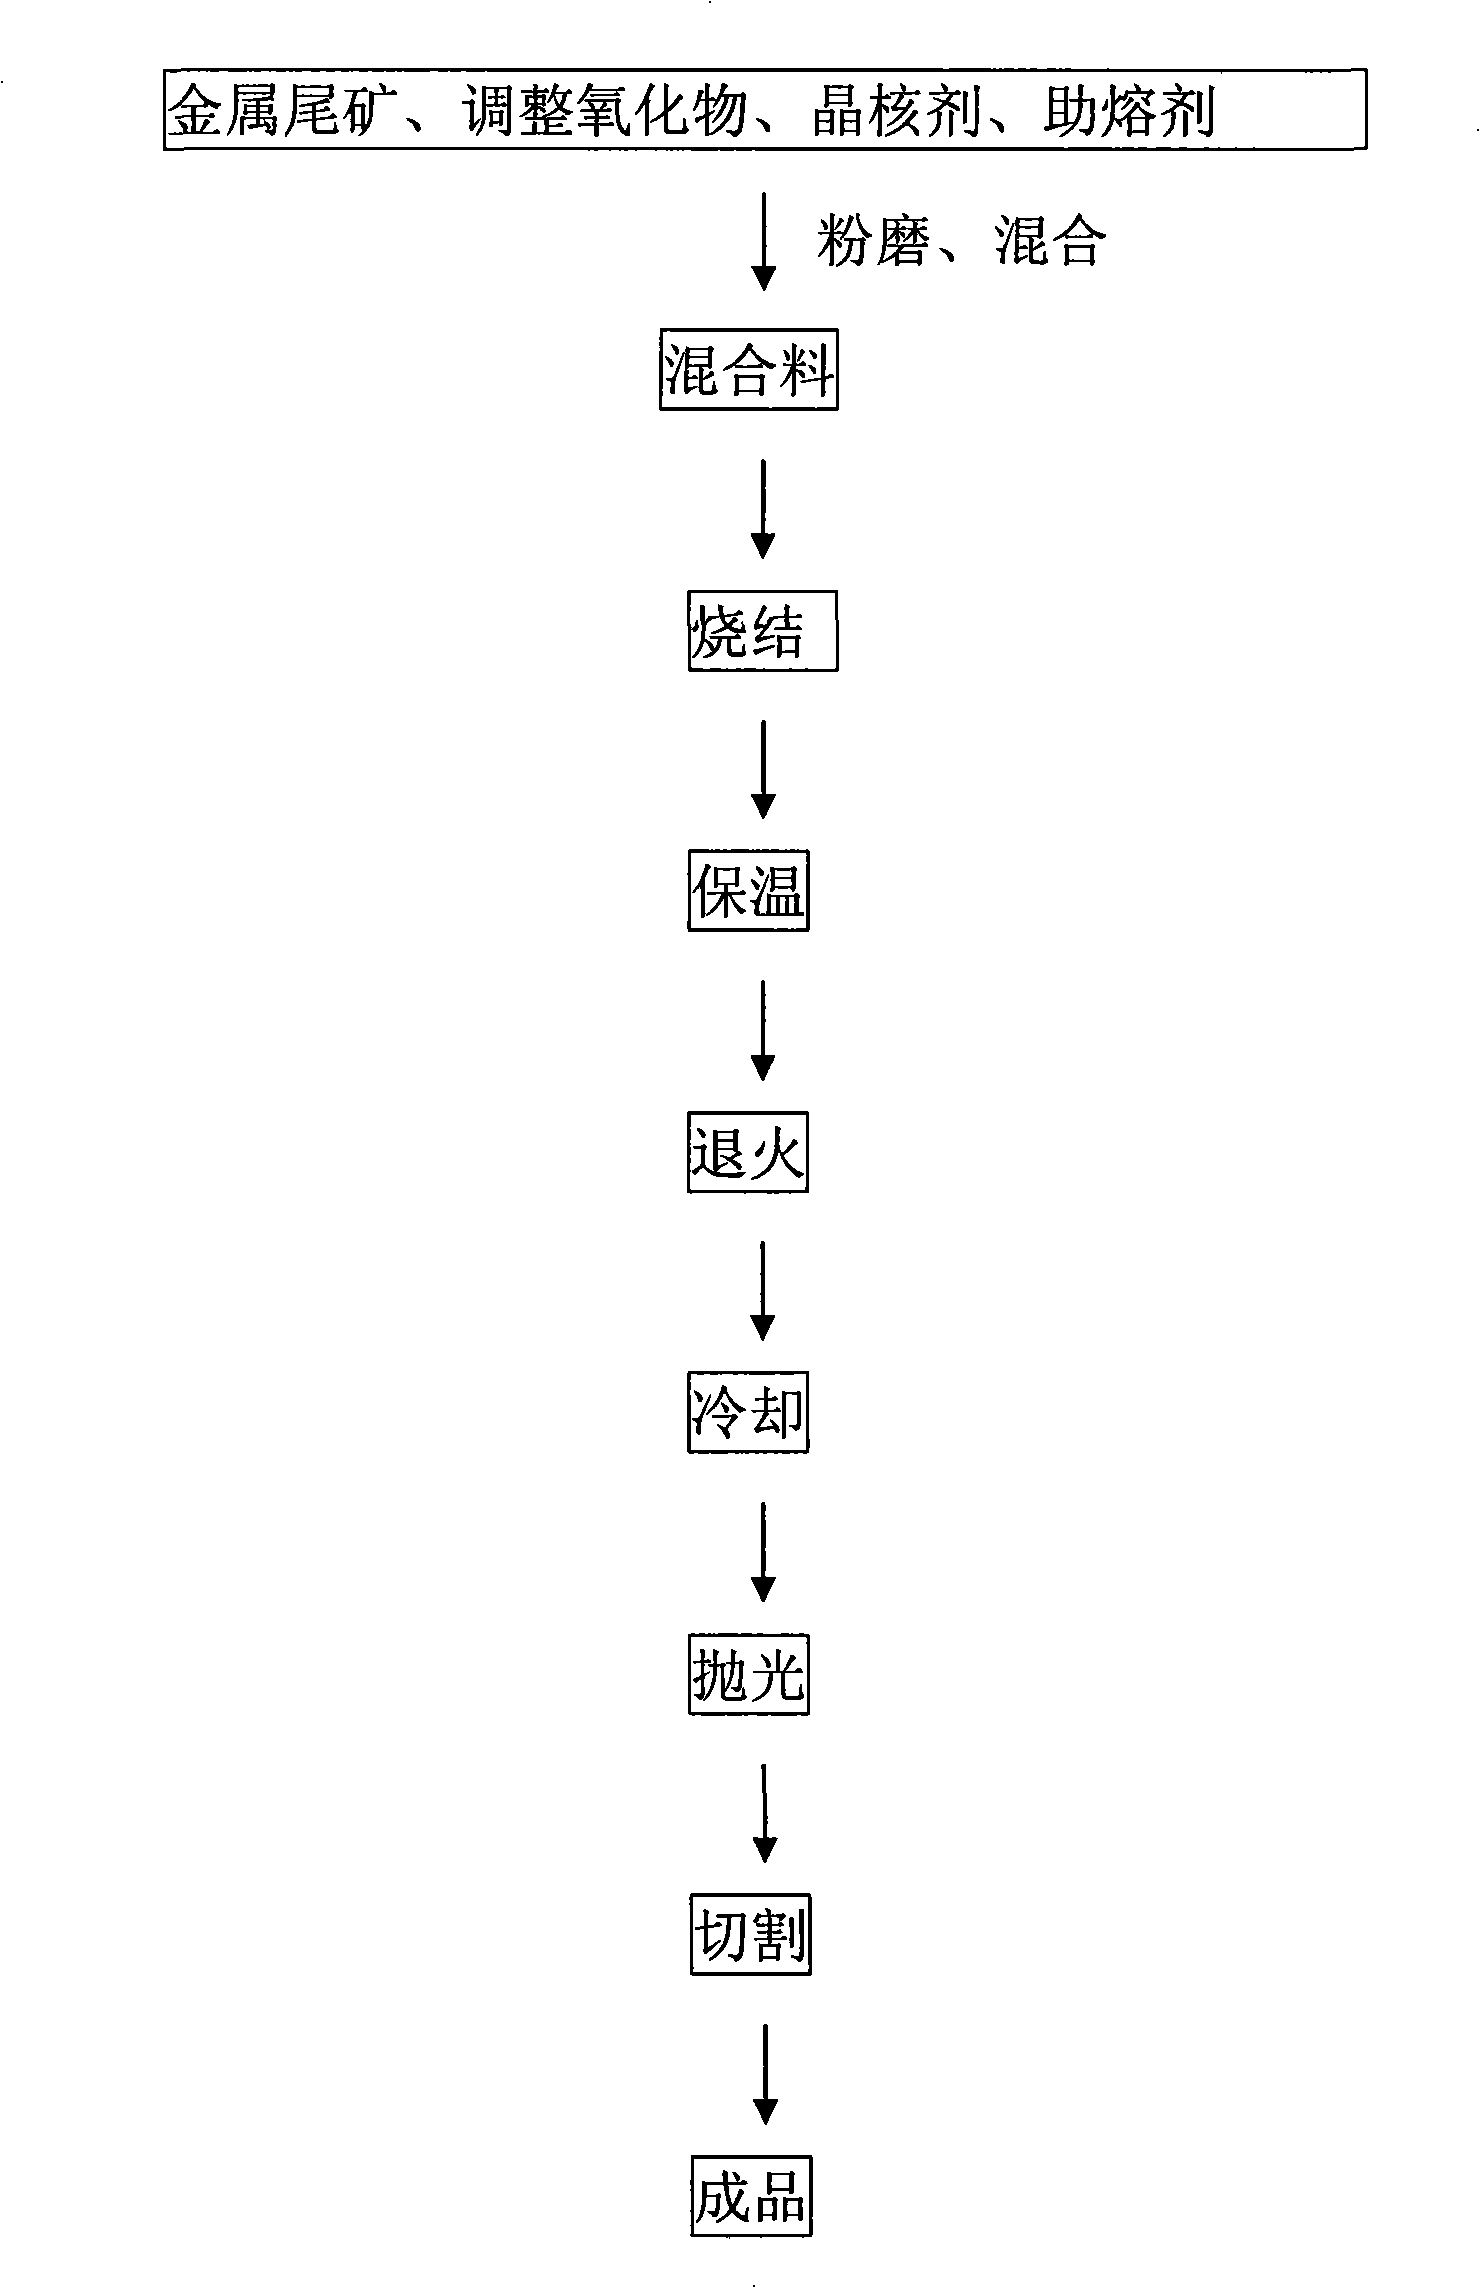 Metal tailings construction nucleated glass and one-step sintering preparation thereof